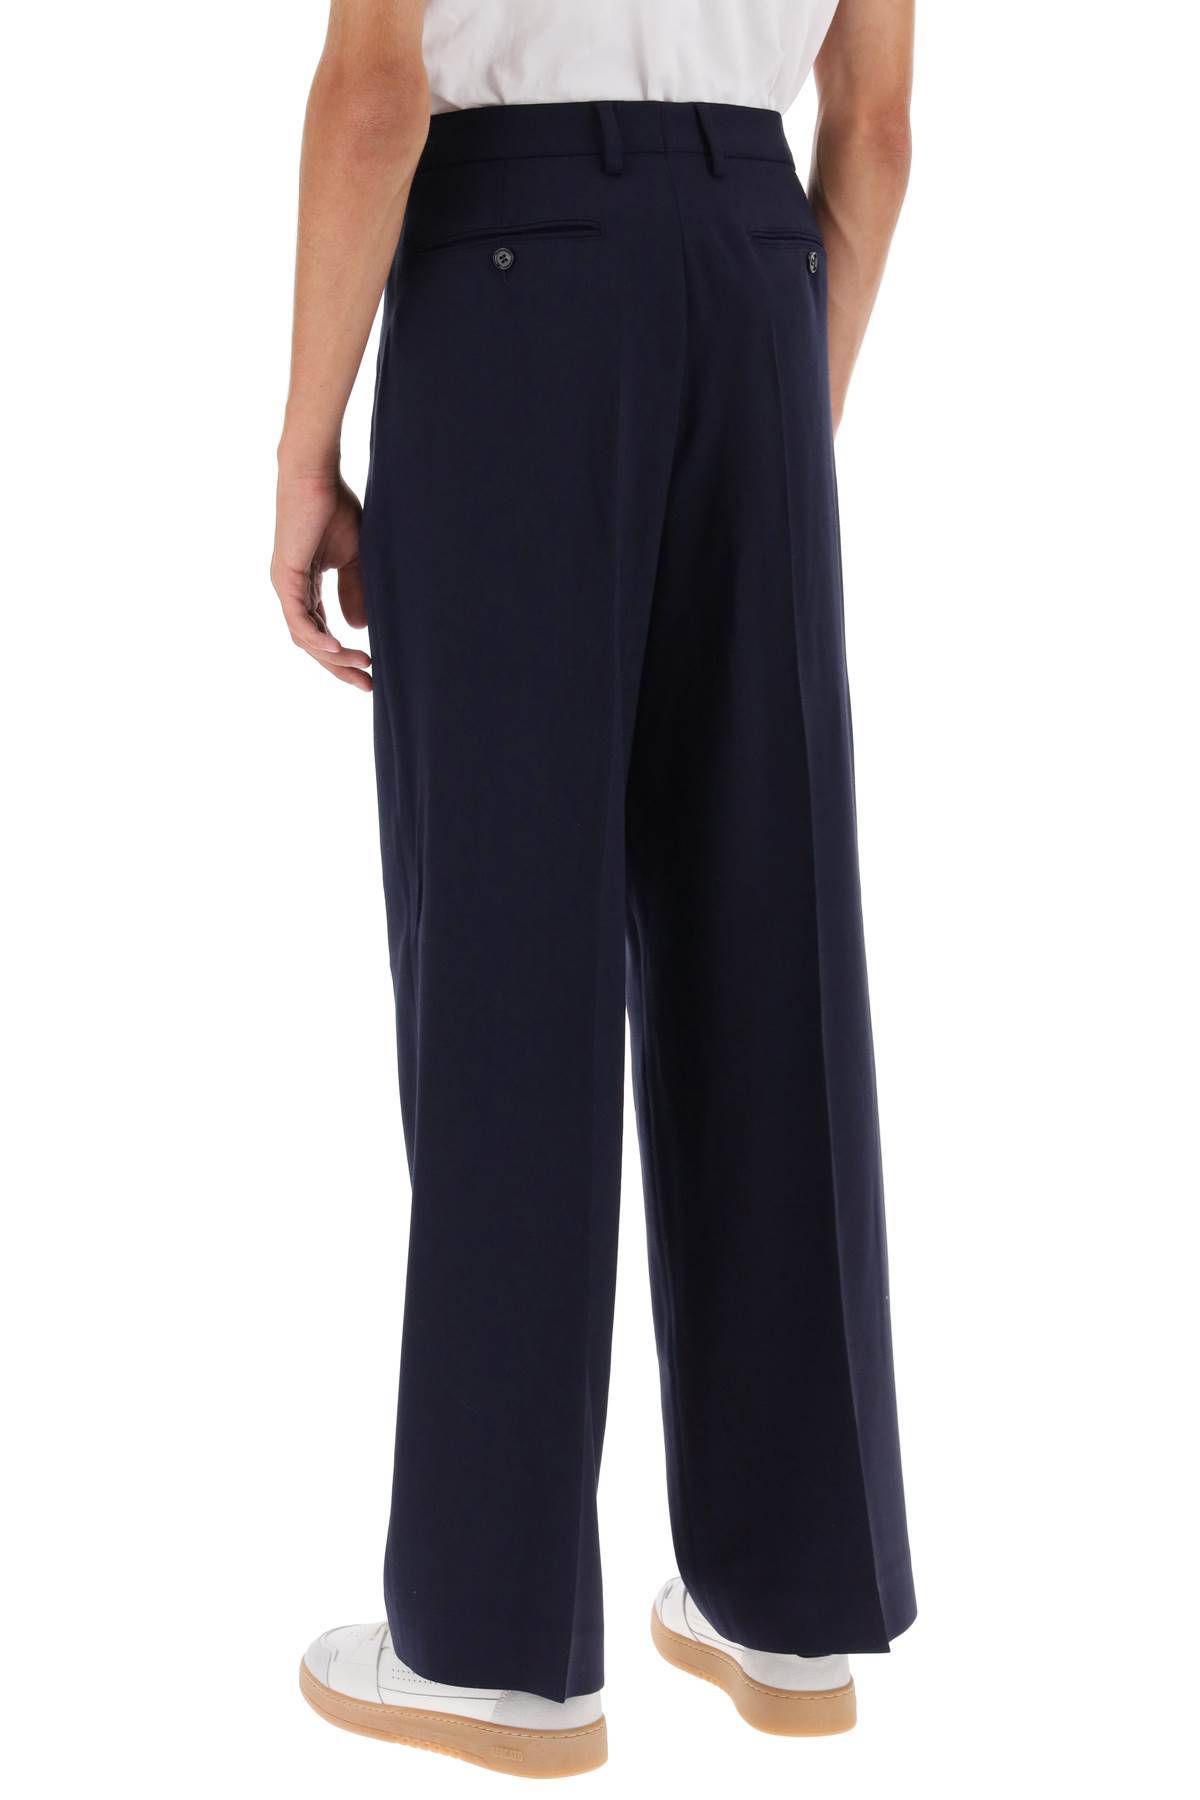 Shop Ami Alexandre Mattiussi Loose Fit Pants With Straight Cut In Blue